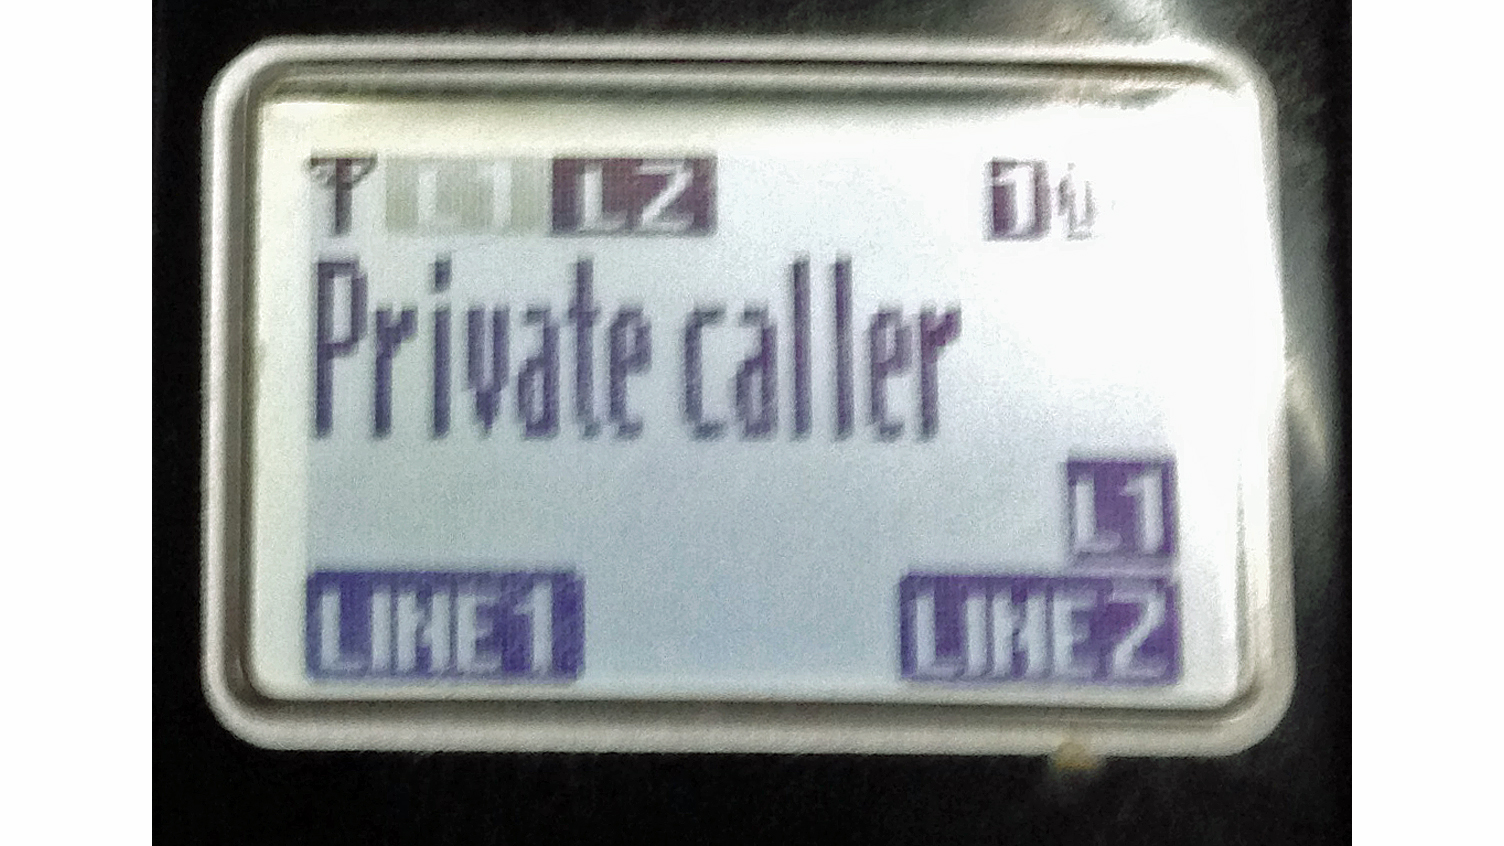 caller id per state vicidial